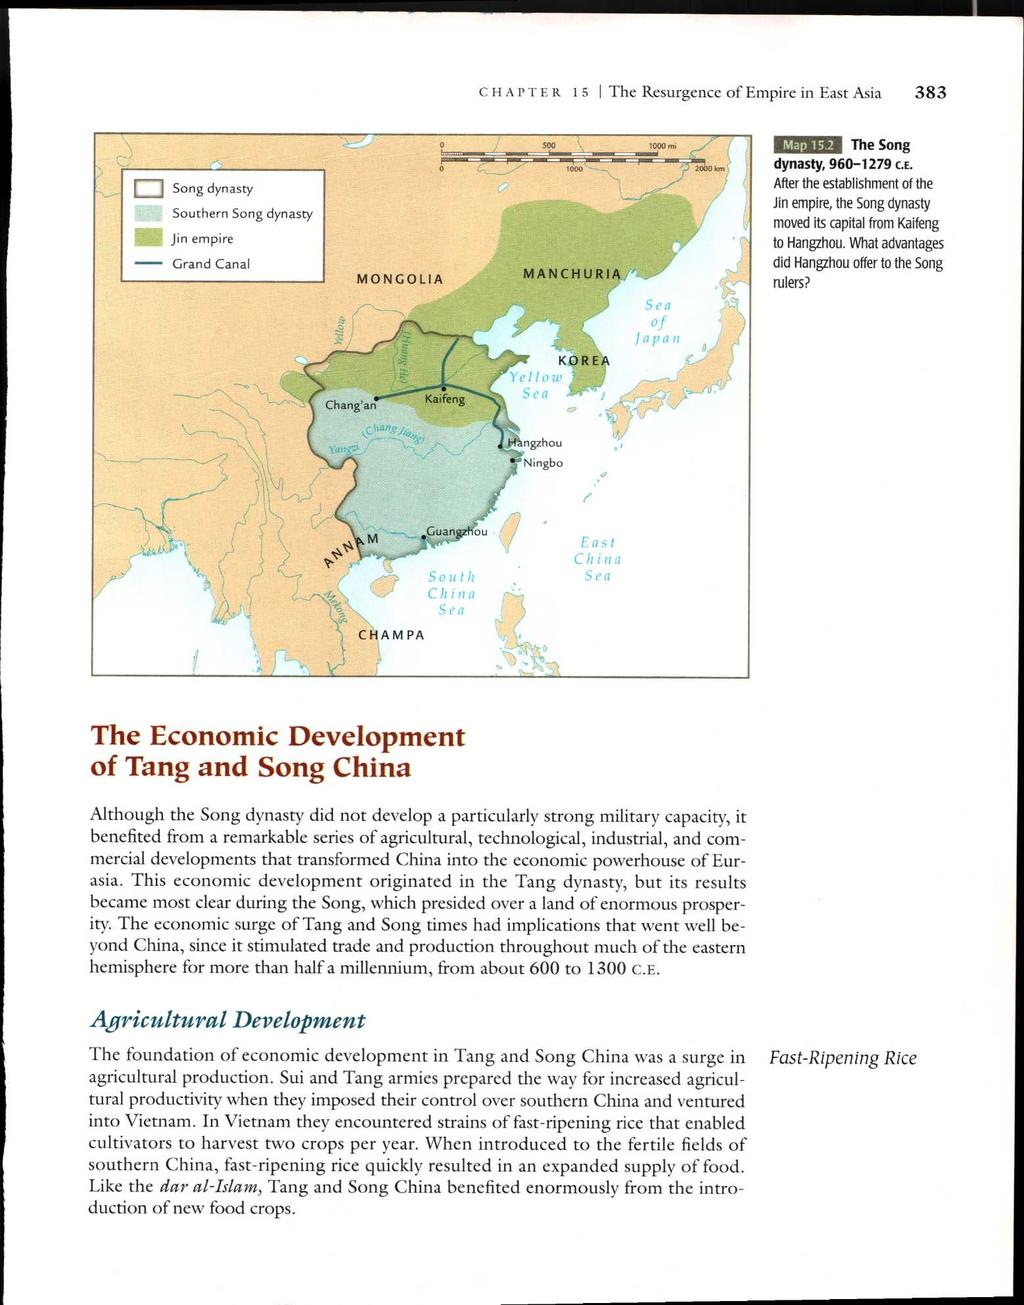 CHAPTER 15 I The Resurgence of Empire in East Asia 383 ri Song dynasty Southern Song dynasty Jin empire Grand Canal MONGOLIA 500 1000 mi 1000-2000 km MANCHURI Map 15.2 The Song dynasty, 960-1279 CE.